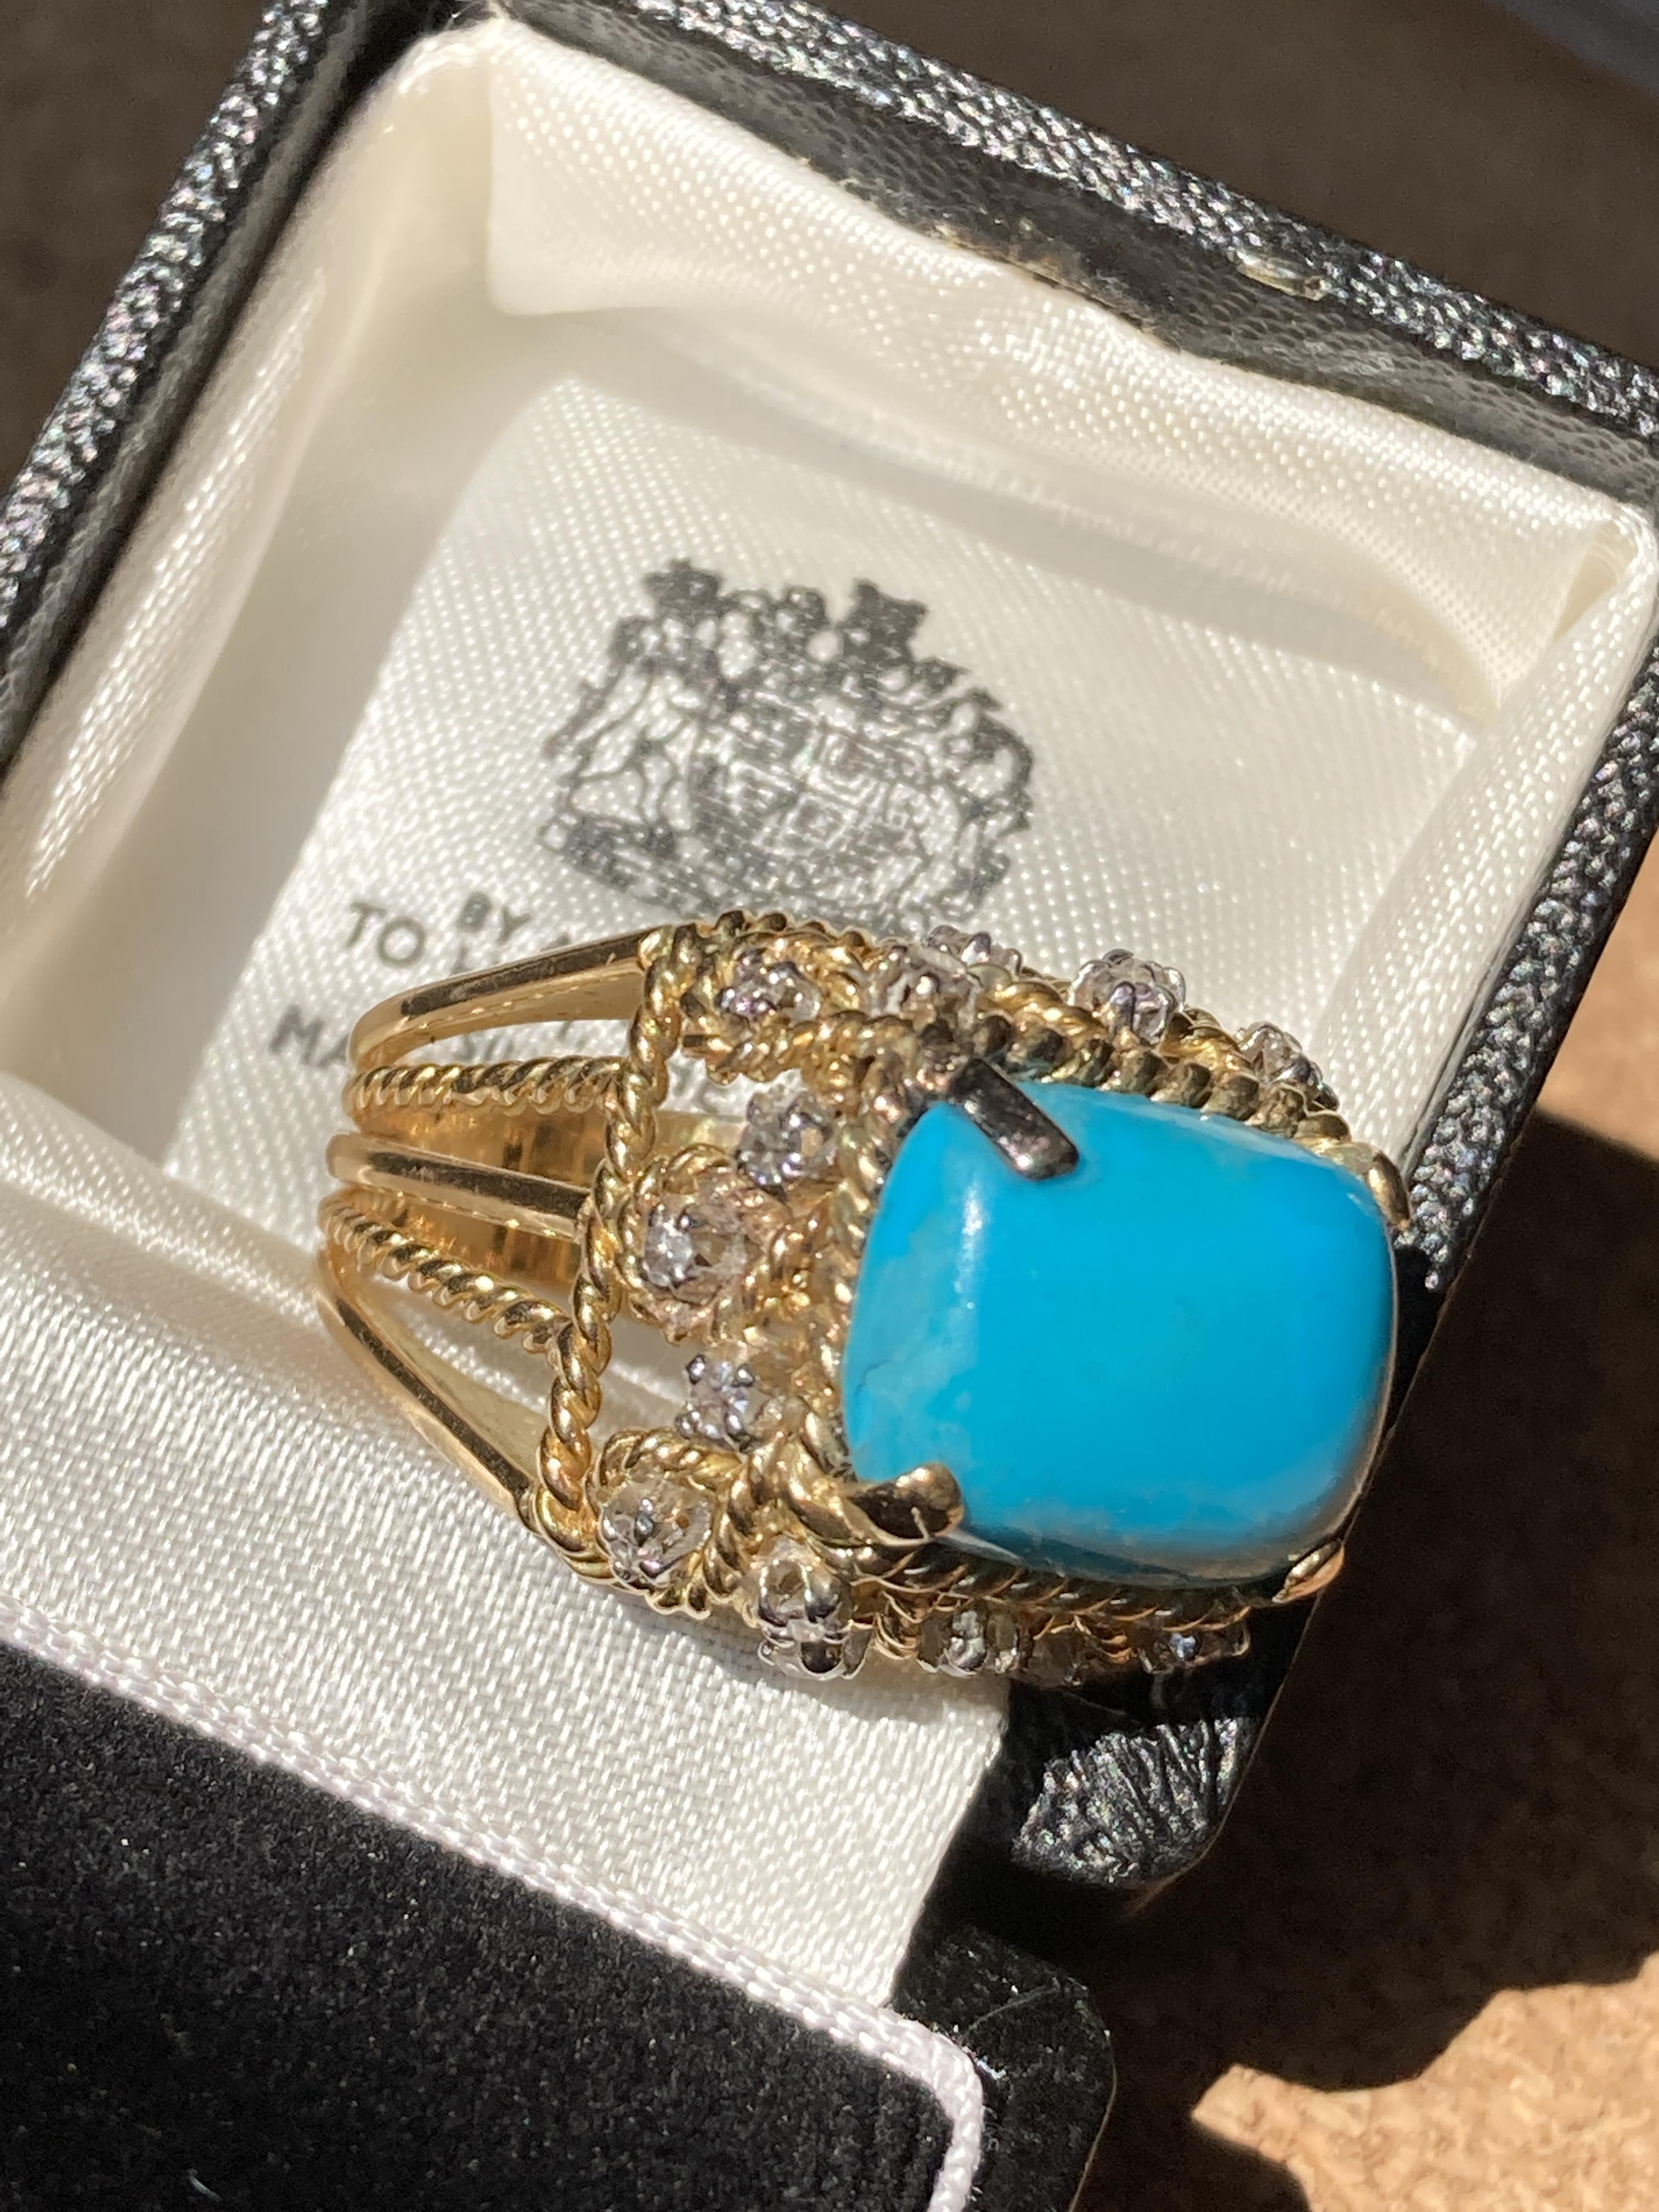 19G 18CT YELLOW GOLD TURQUOISE & DIAMOND COCKTAIL RING